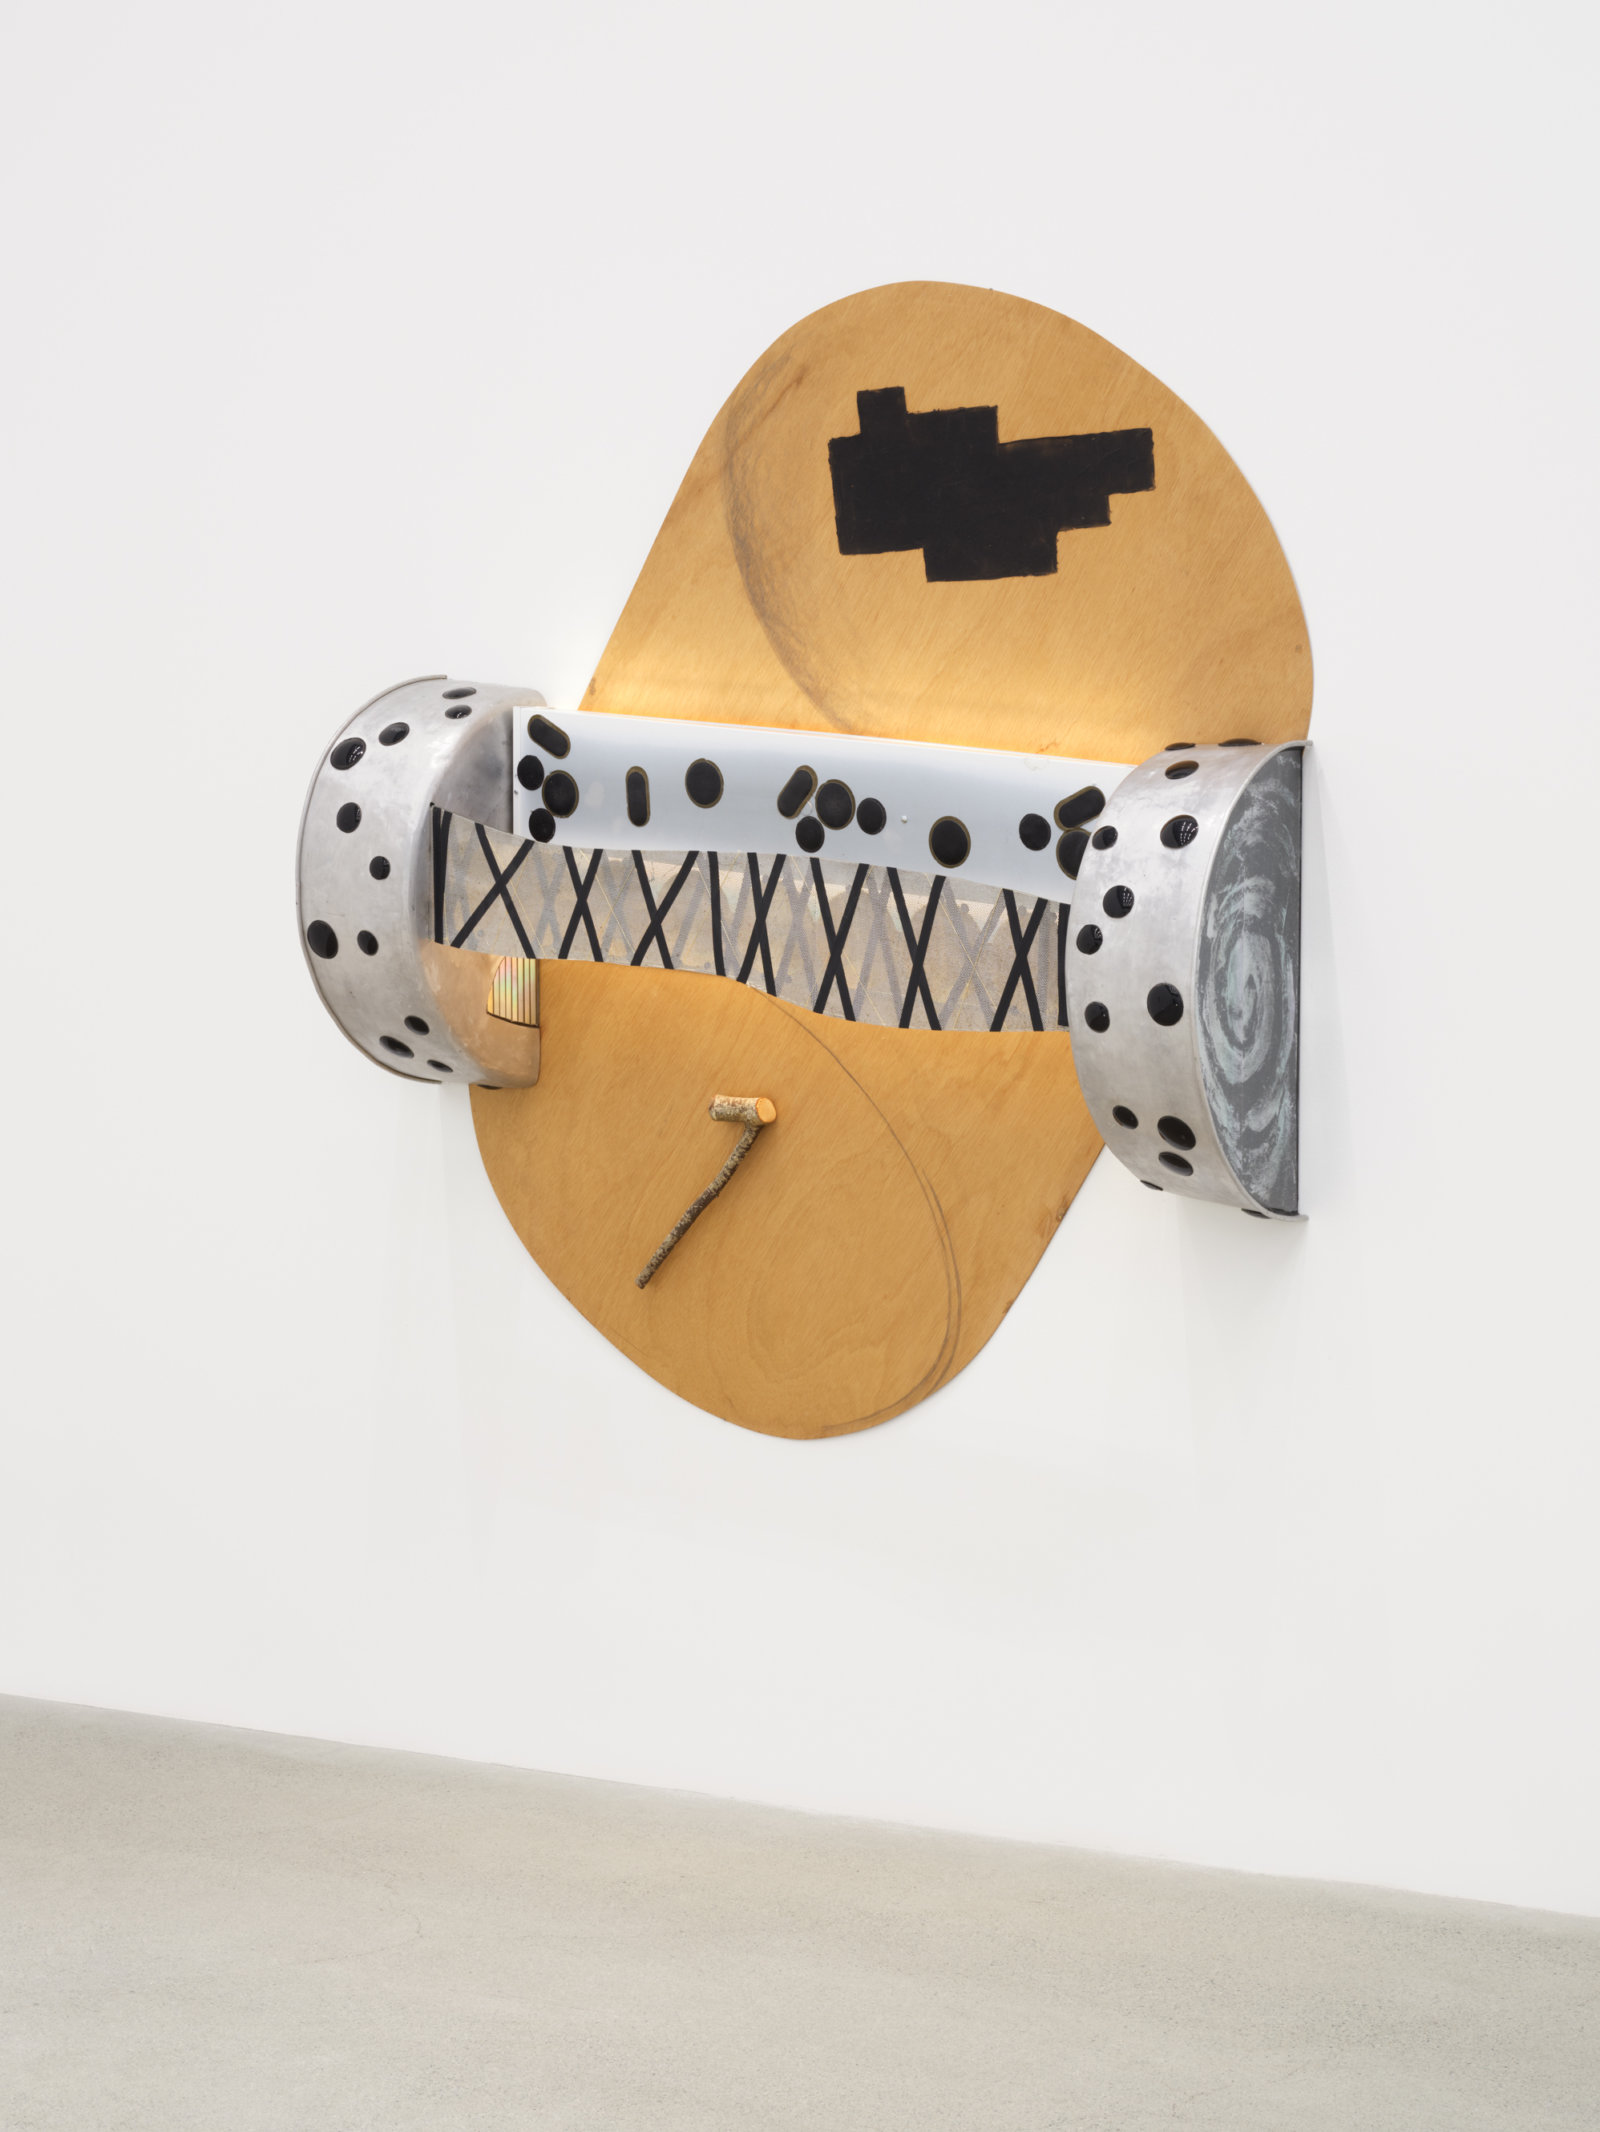 Jerry Pethick, Before The End, 1995, photo array, plywood, aluminum, wood, silicone, watch glasses, Fresnel lenses, glass, fluorescent fixture, butyrate, 74 x 68 x 14 in. (189 x 173 x 36 cm)